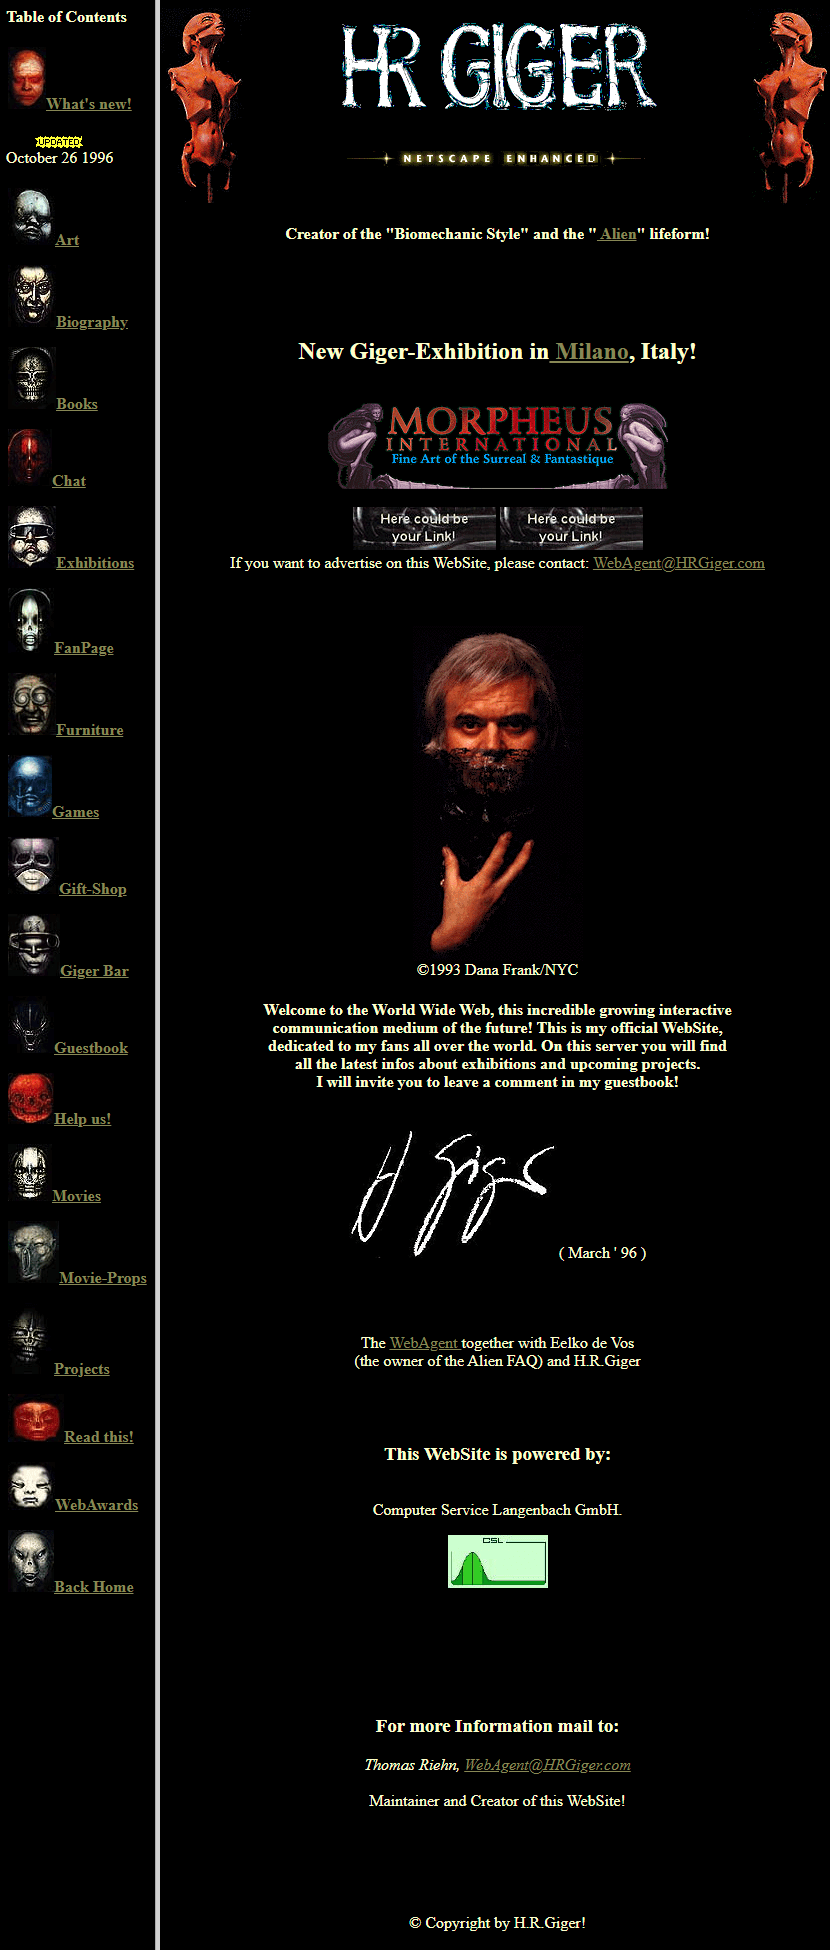 H. R. Giger in 1996